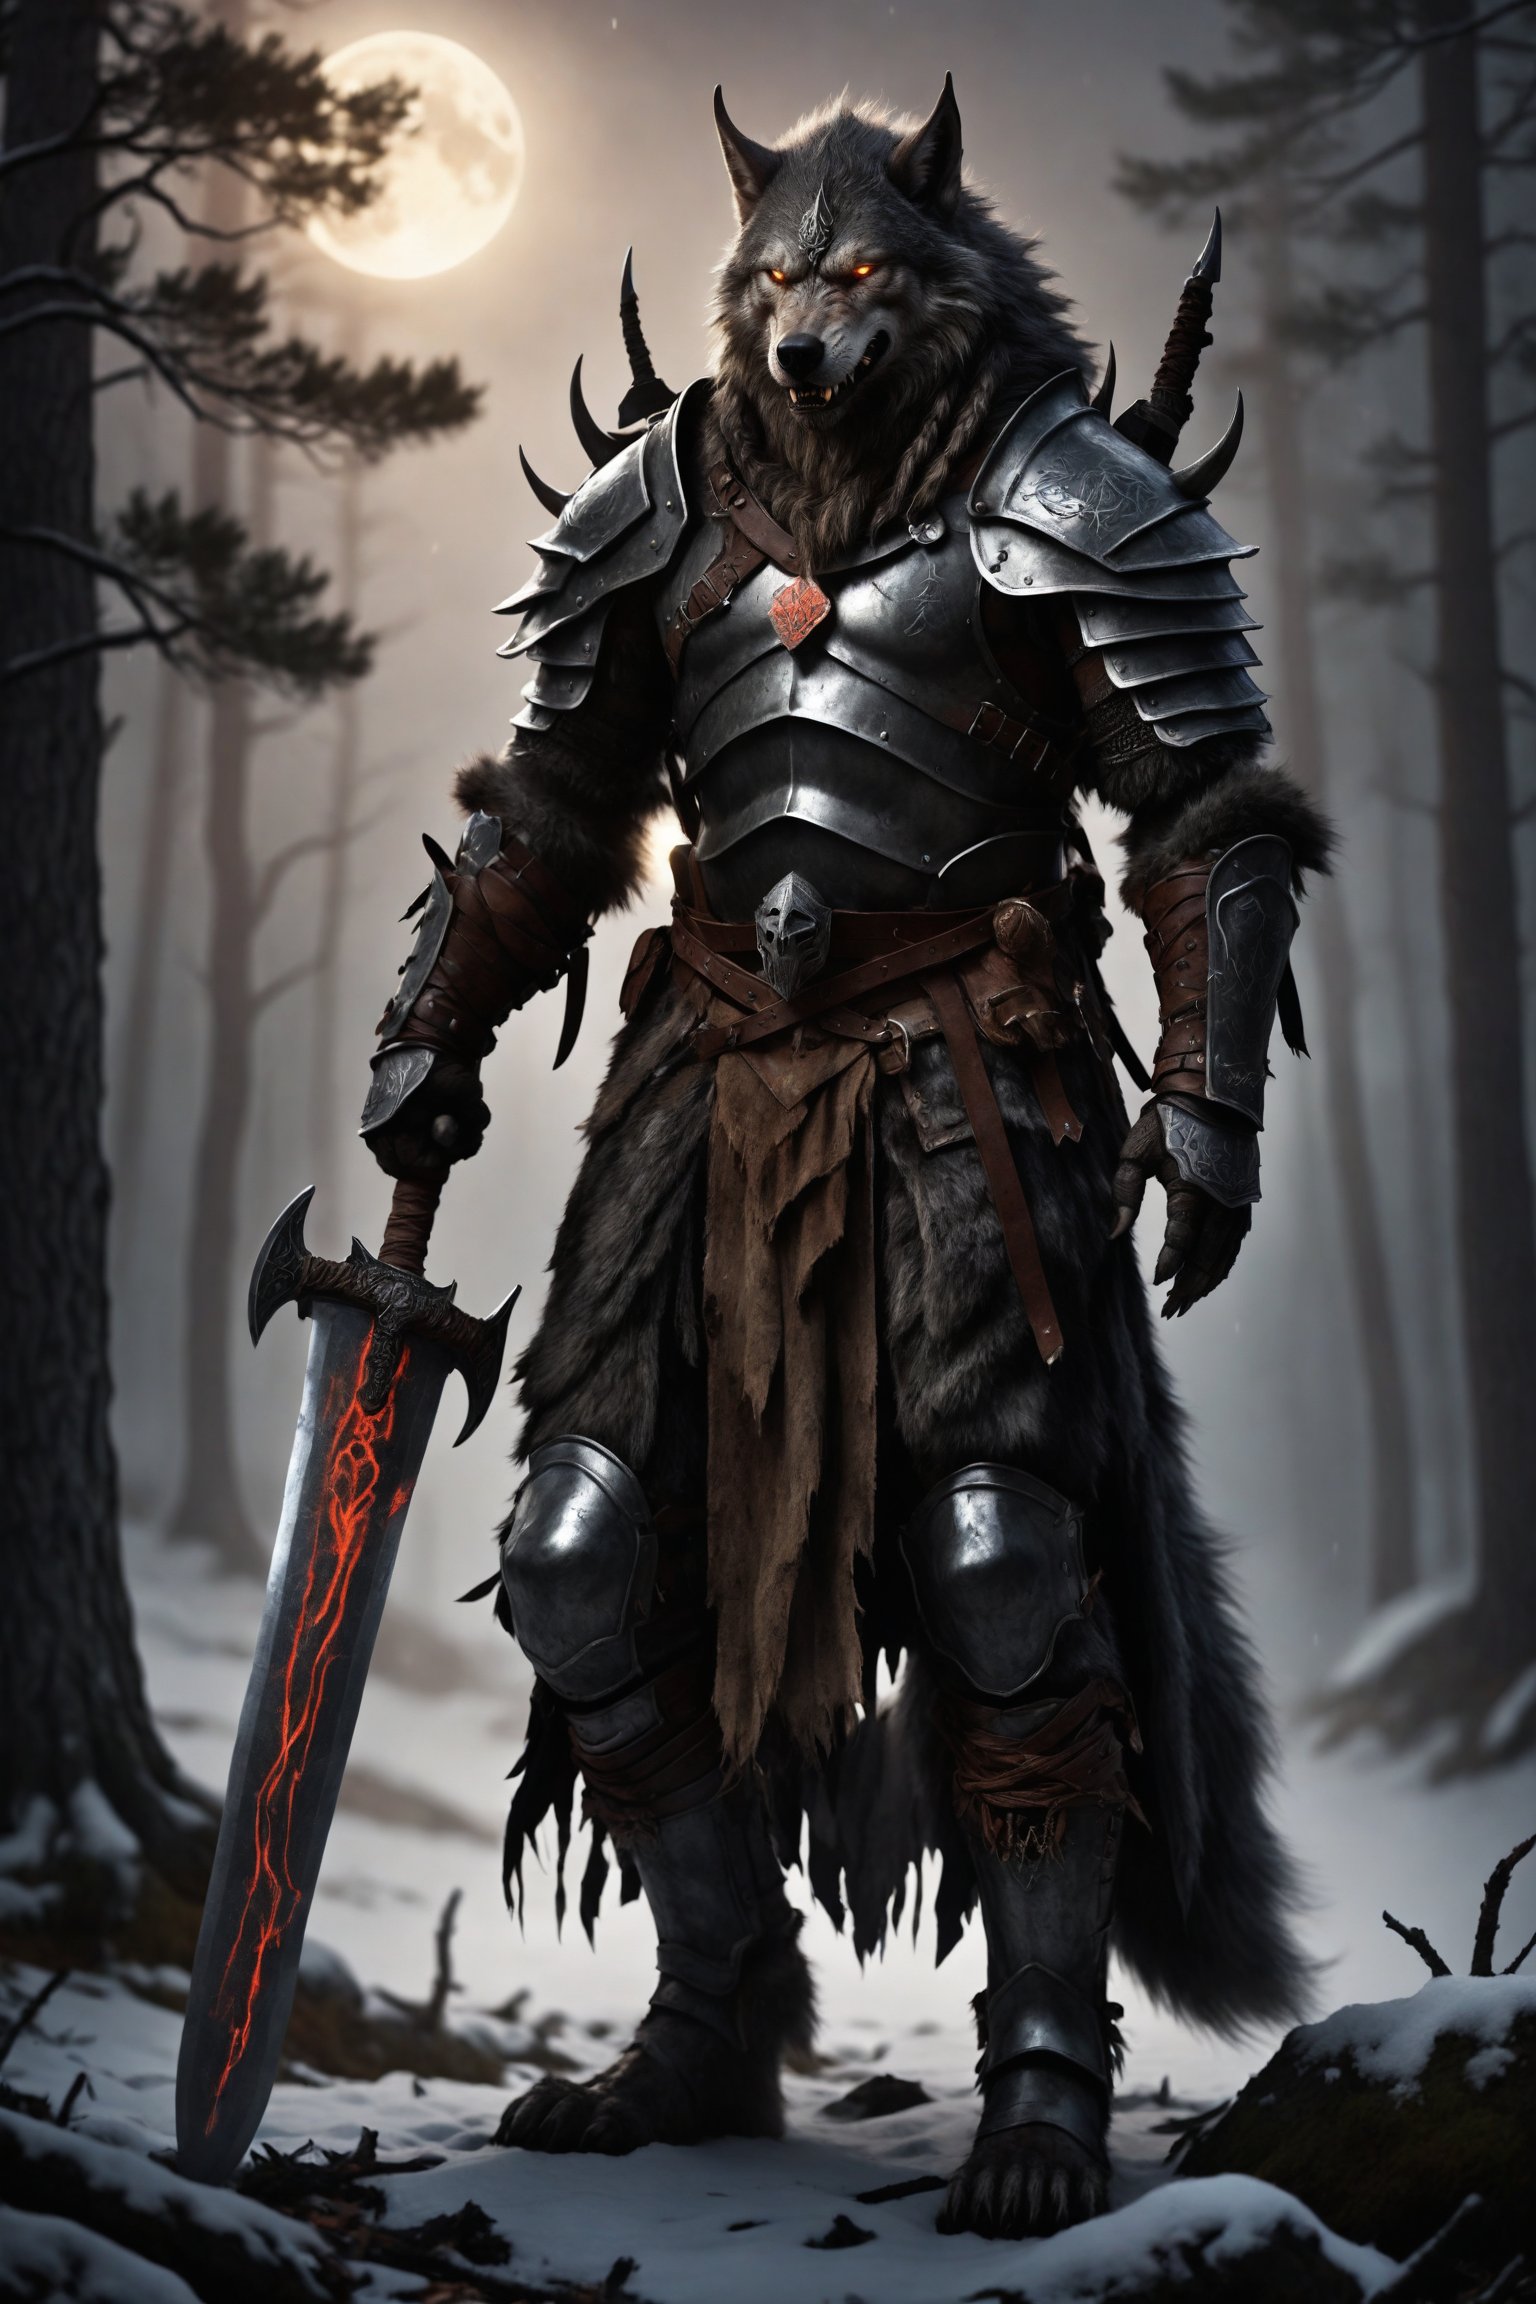 Werewolf warrior in Viking attire,wolf face, massive greatsword resting on shoulder, fur-trimmed leather armor, Norse runes on blade, standing amidst ancient pine forest, misty atmosphere, moonlight filtering through branches, glowing amber eyes, wolf-like features, battle-scarred, muscular physique, braided beard, iron helmet with horns, snow-covered ground, distant howling, photorealistic style, dramatic lighting,LegendDarkFantasy,kawaii knight,cyborg,royal knight,werewolf